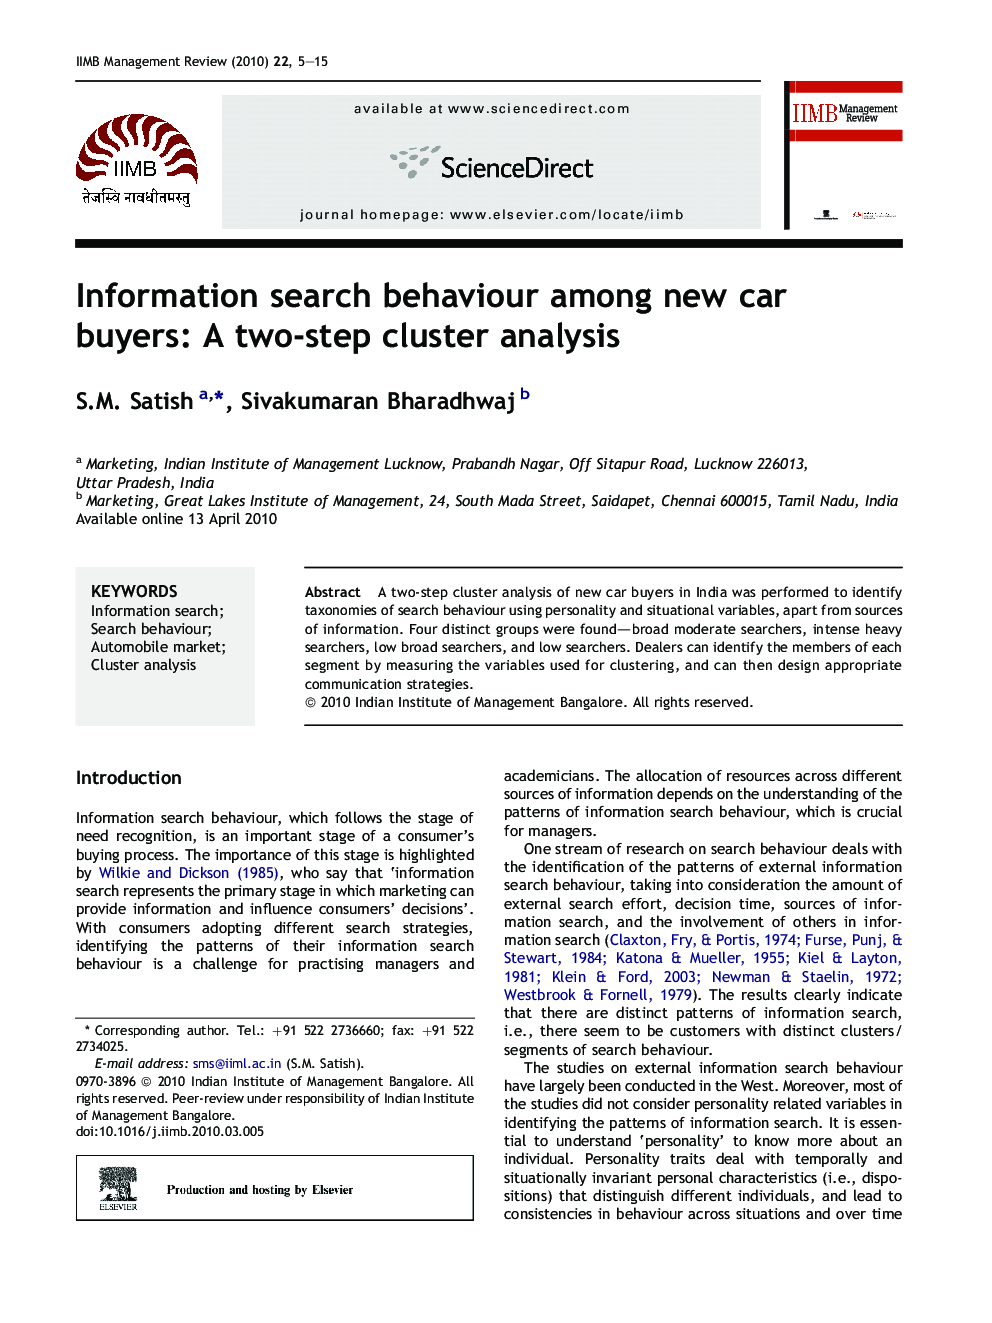 Information search behaviour among new car buyers: A two-step cluster analysis